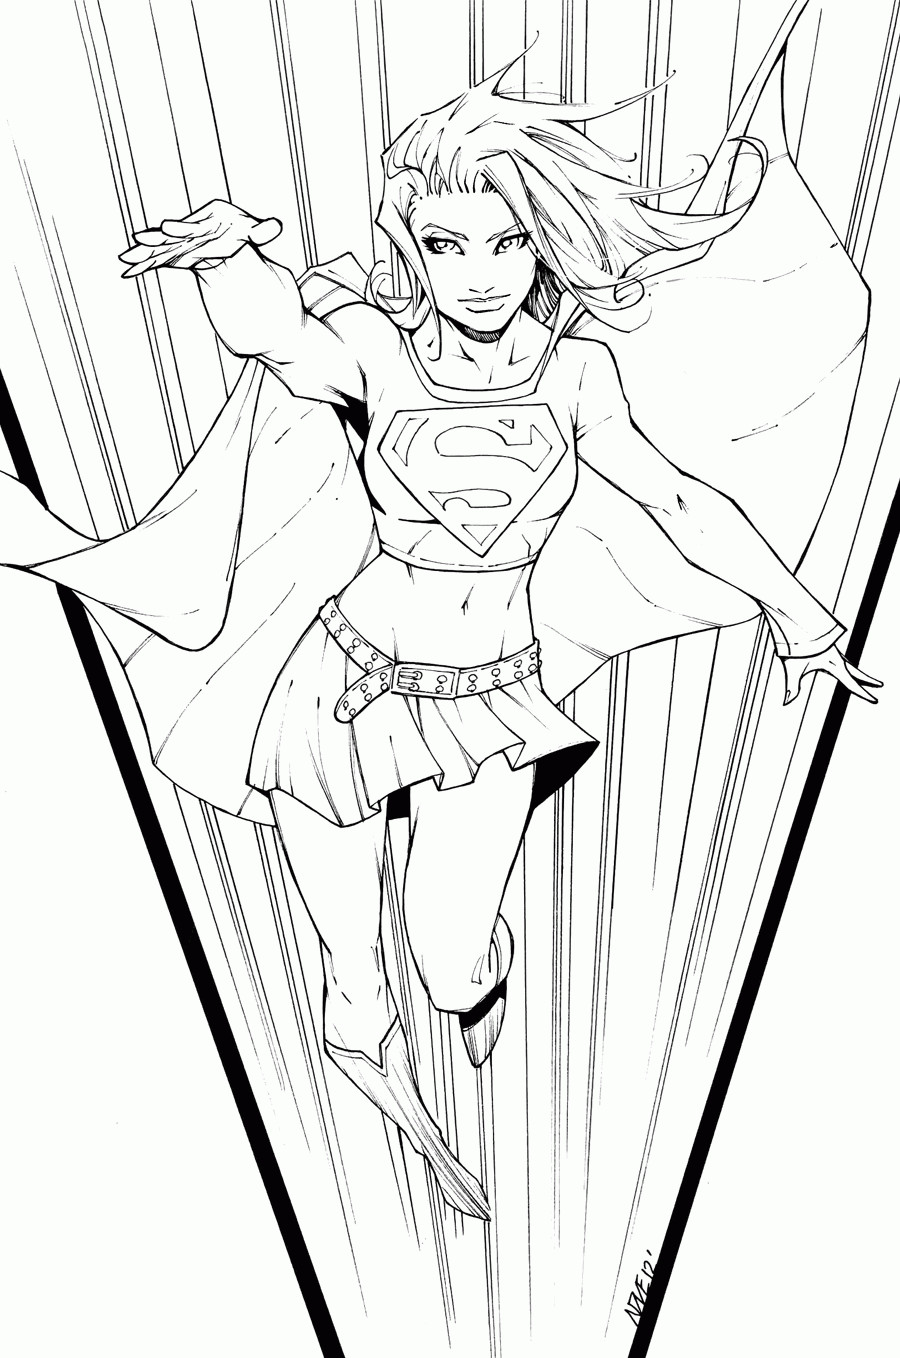 Ausmalbilder Supergirl
 Supergirl Coloring Page AZ Coloring Pages